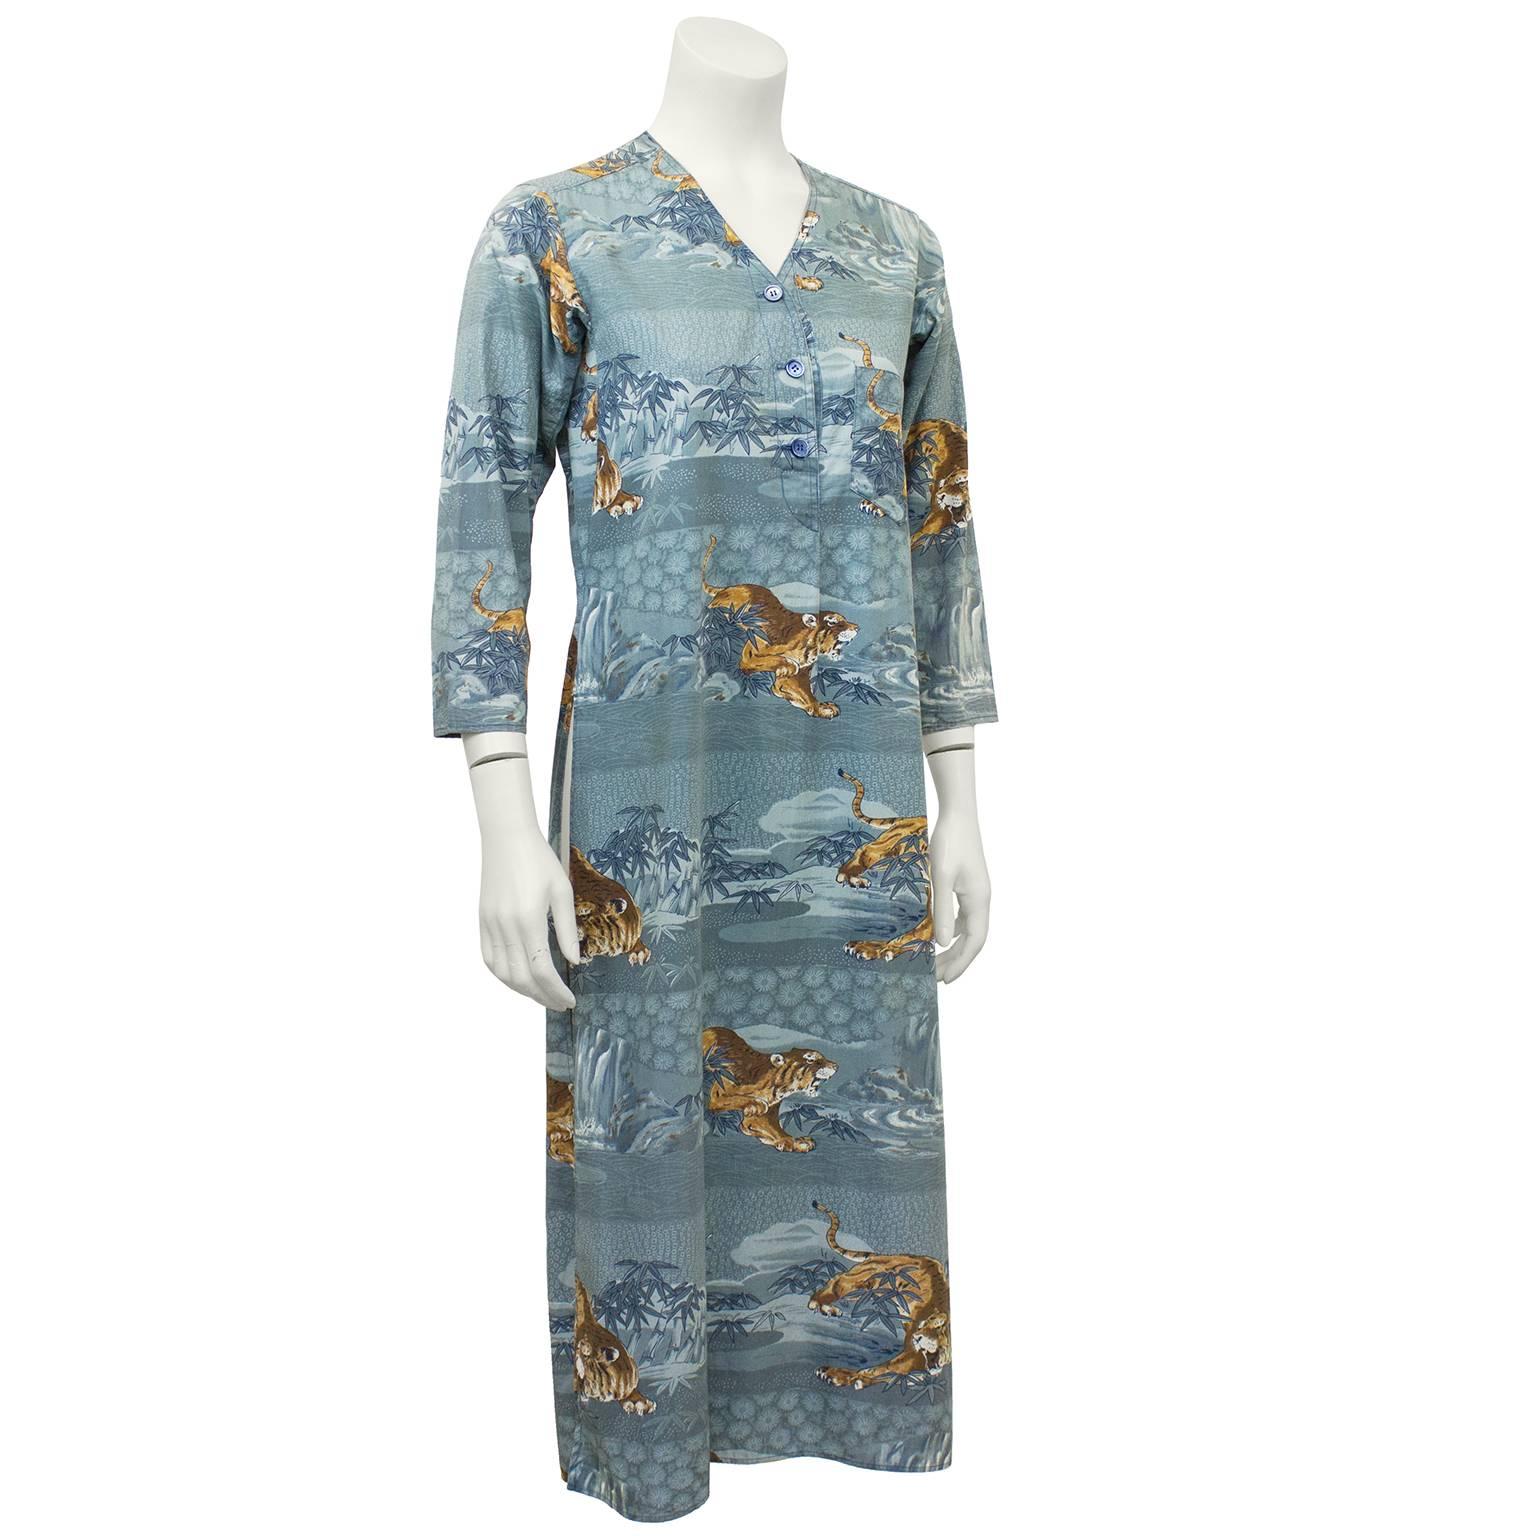 1970's Kenzo JAP blue cotton tunic featuring a Japanese jungle print of waterfalls and the iconic Kenzo tiger. Slits up both legs, 3/4 length sleeves, small pocket on left side of bust when wearing and v-neck with 3 button closure. Very early Kenzo